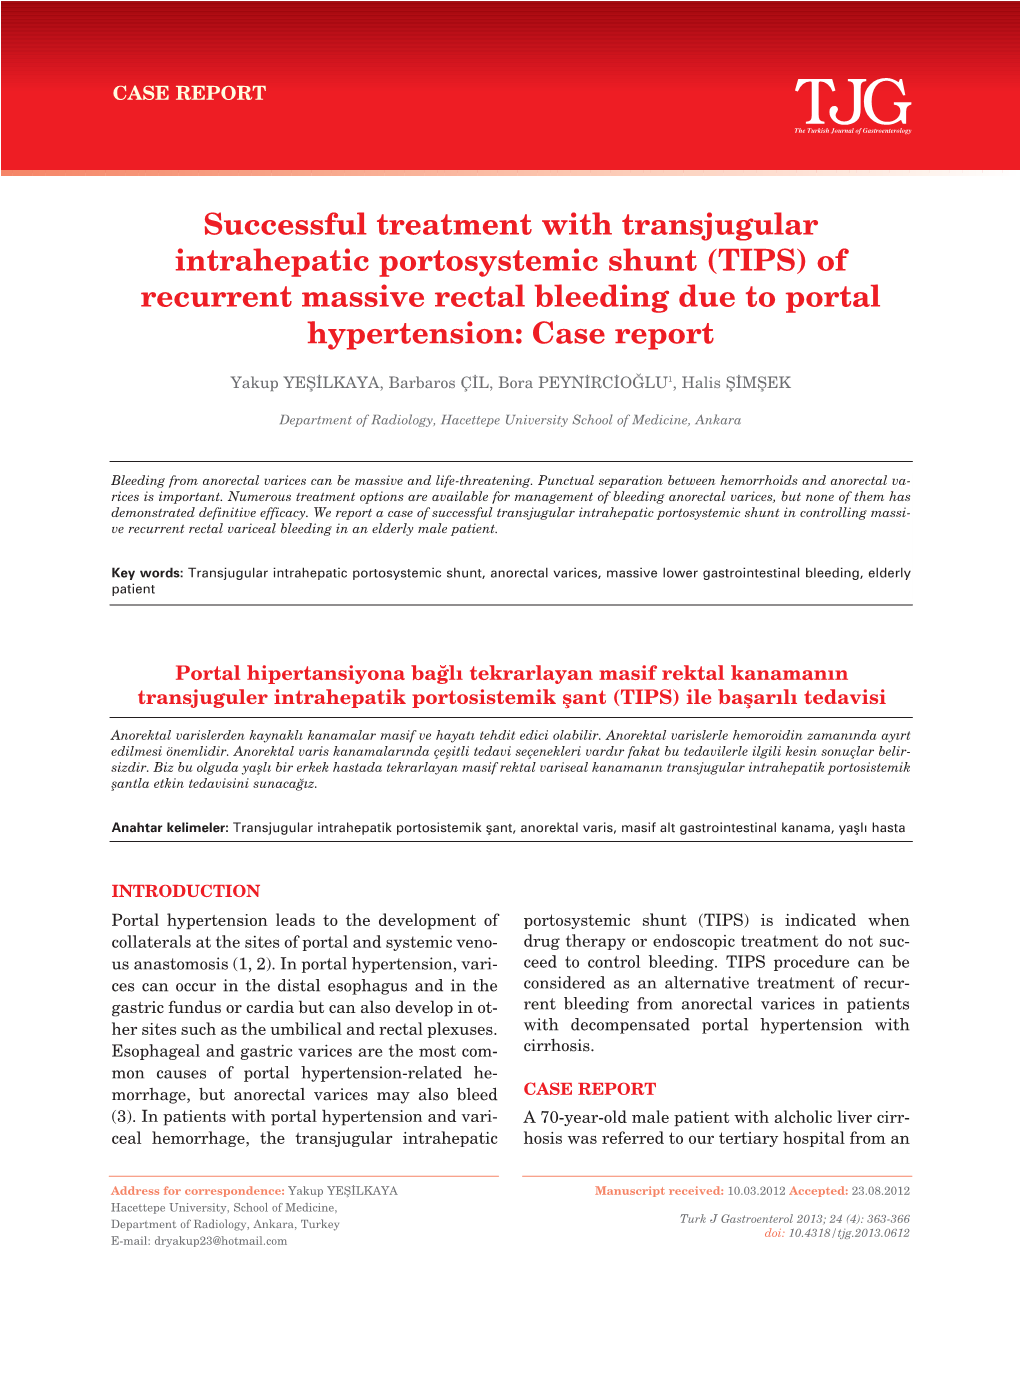 Successful Treatment with Transjugular Intrahepatic Portosystemic Shunt (TIPS) of Recurrent Massive Rectal Bleeding Due to Portal Hypertension: Case Report